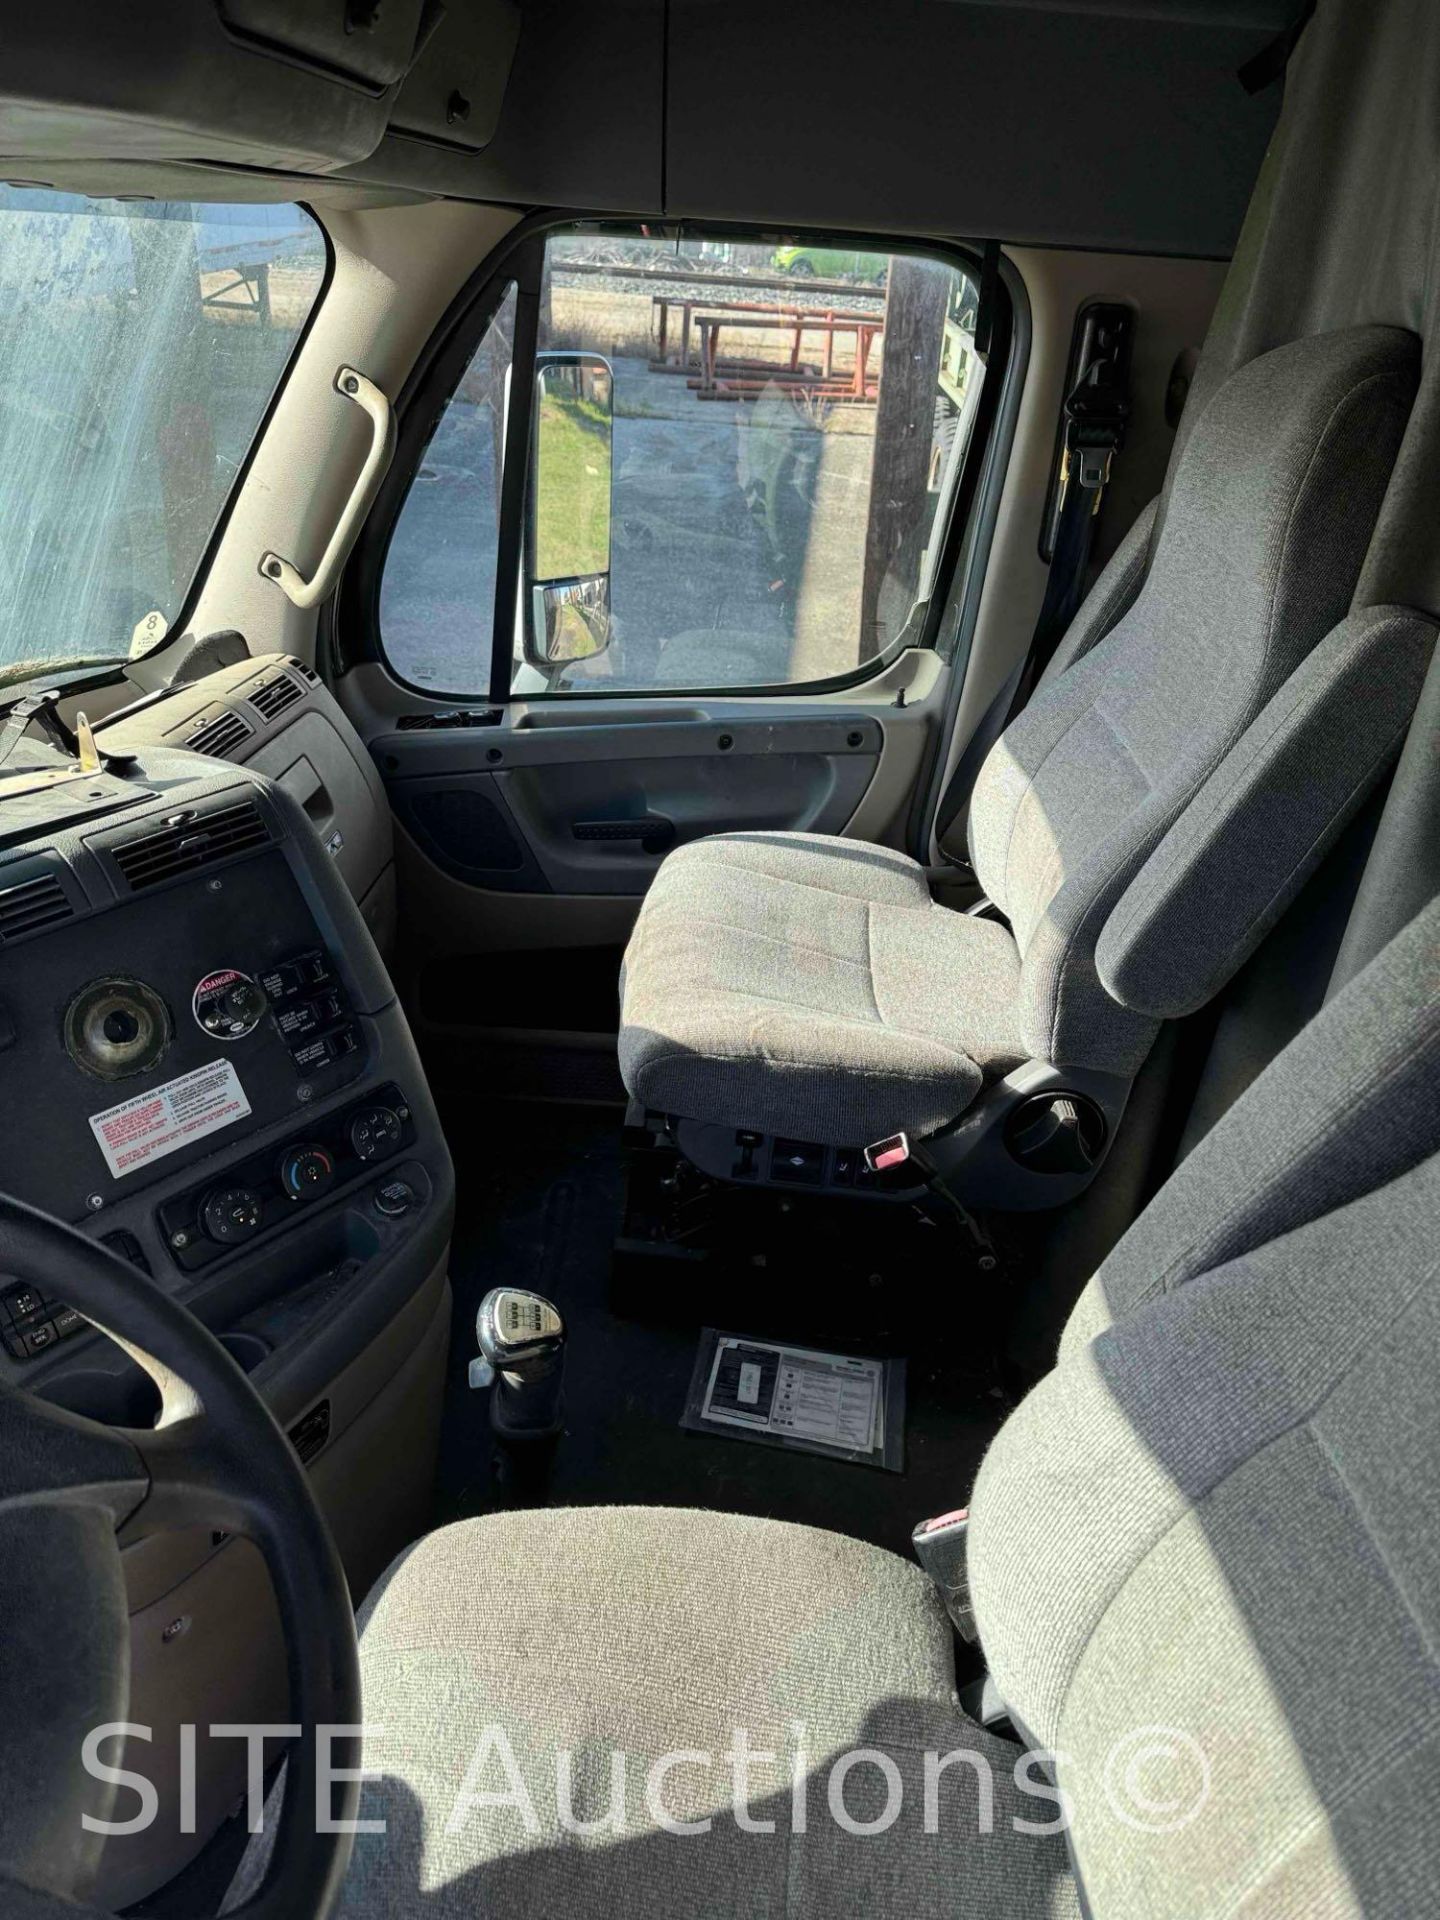 2010 Freightliner Cascadia T/A Sleeper Truck Tractor - Image 29 of 39